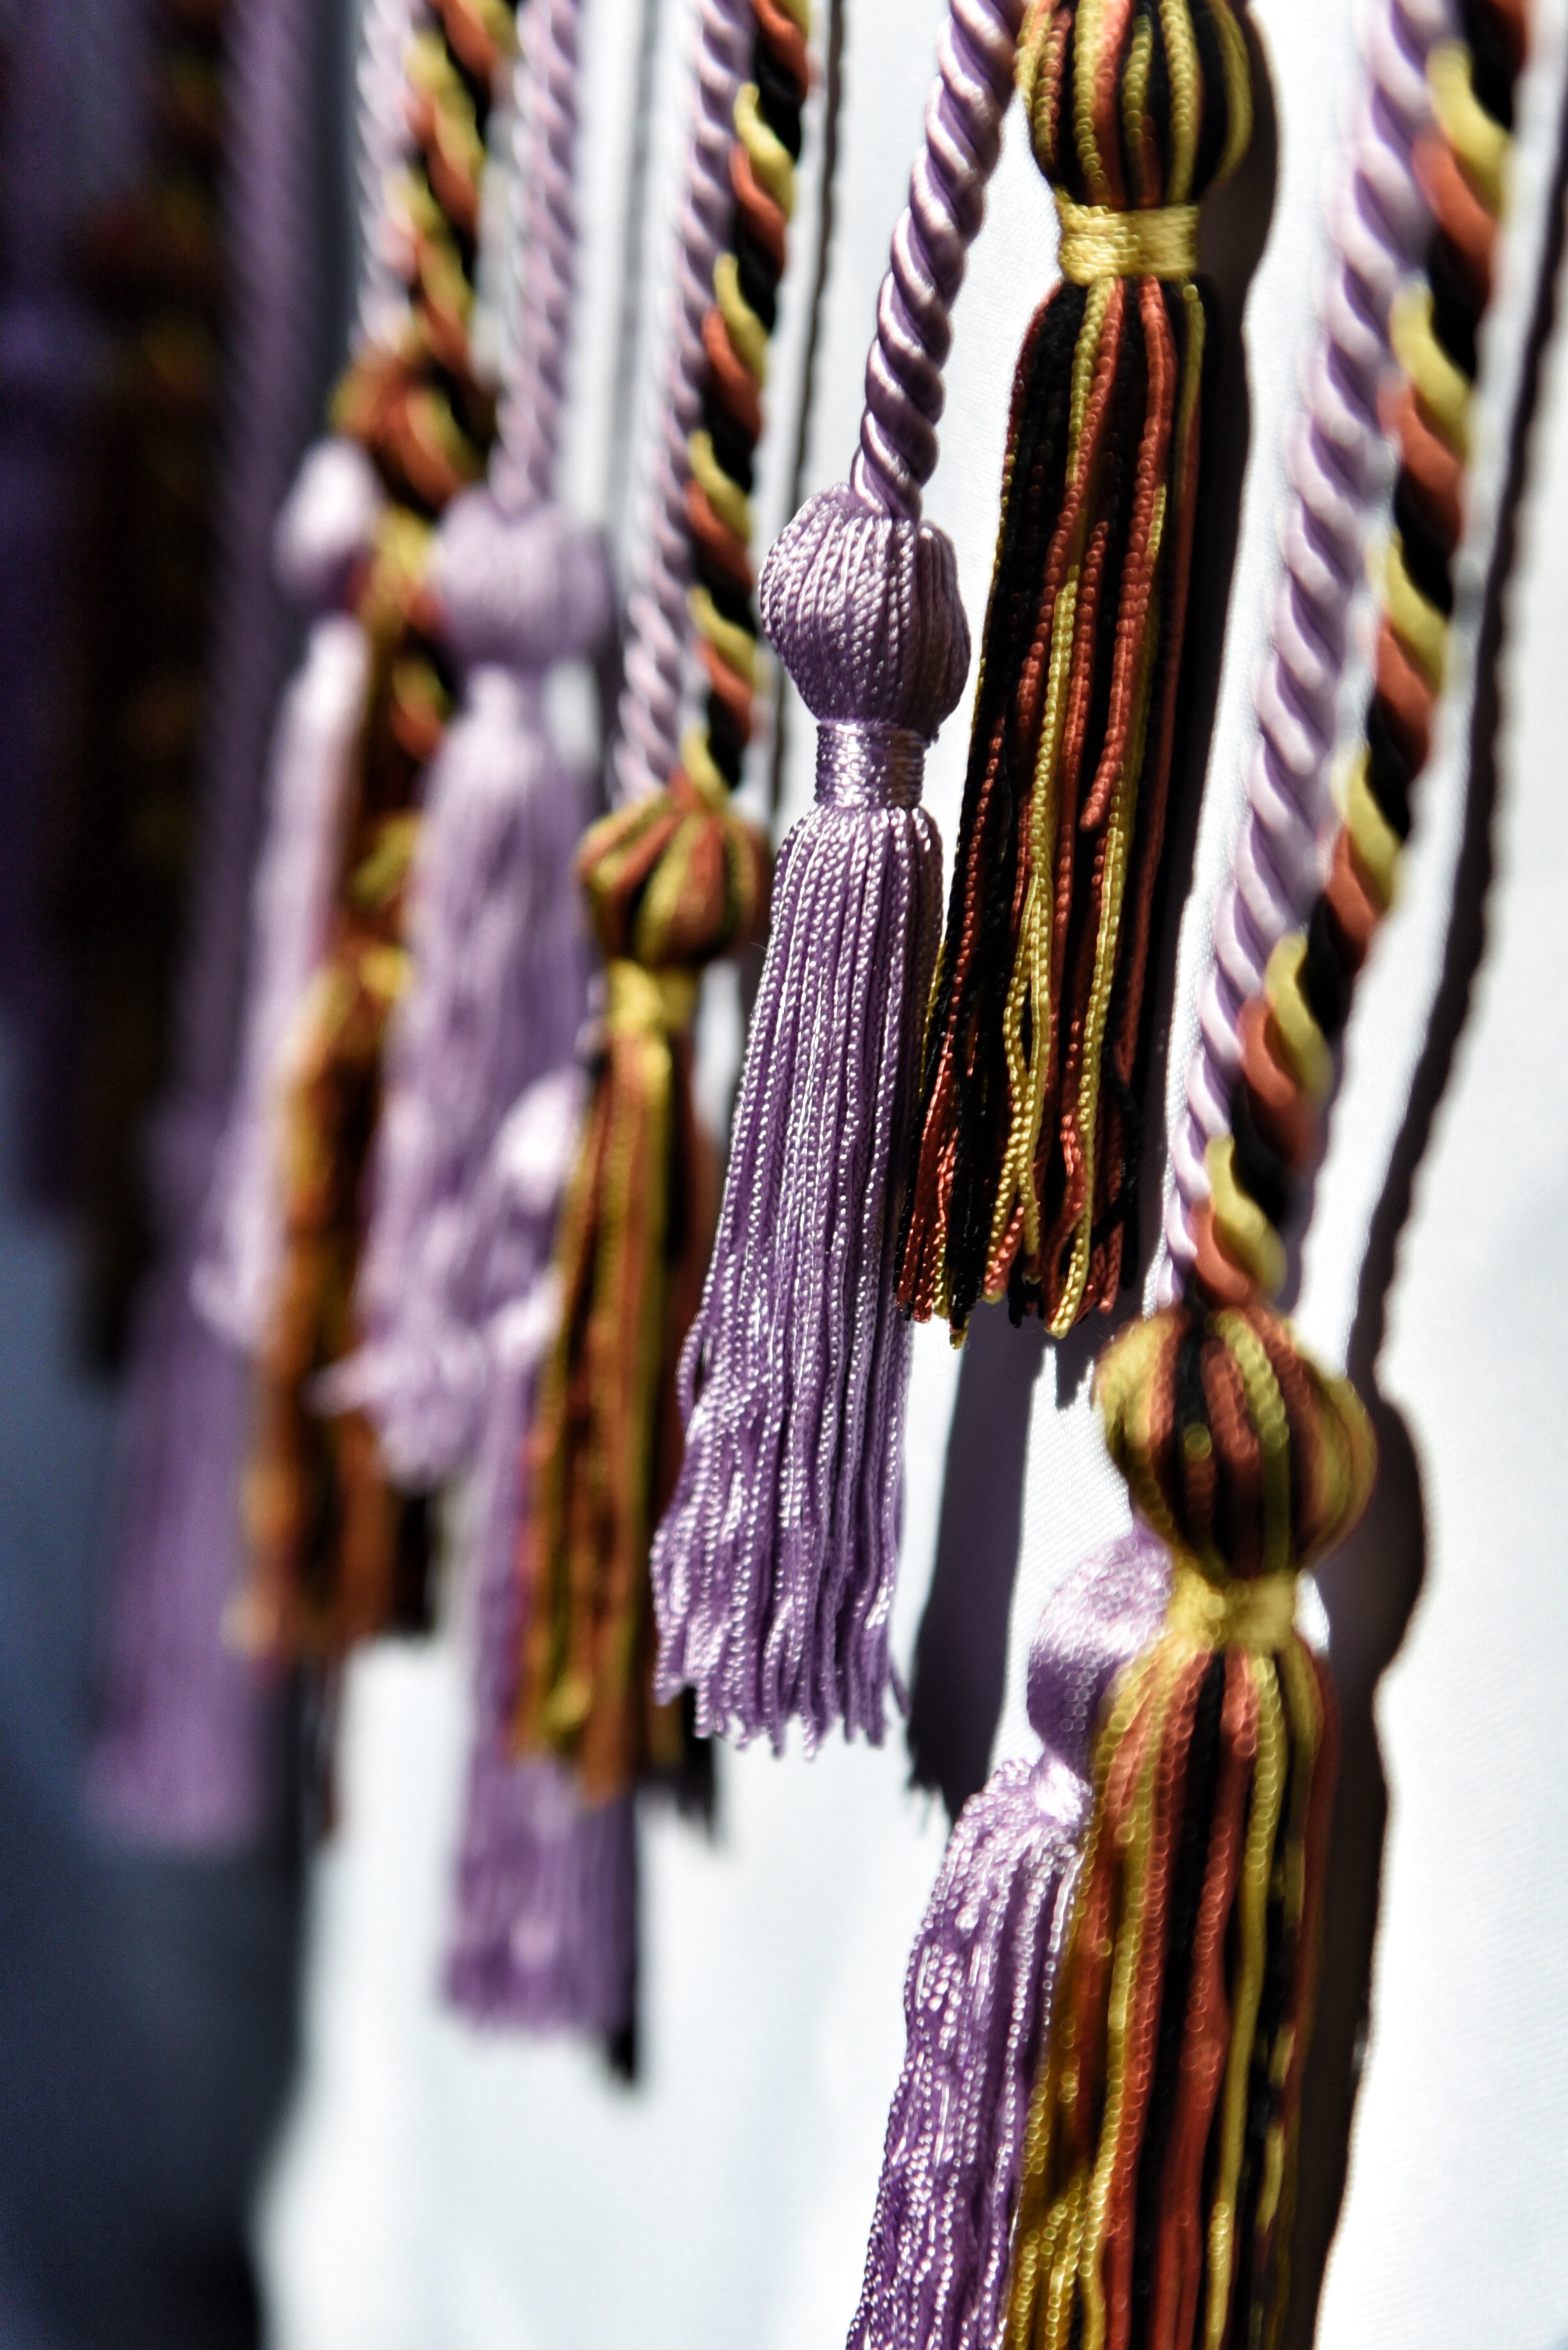 Honor cords hanging from the table